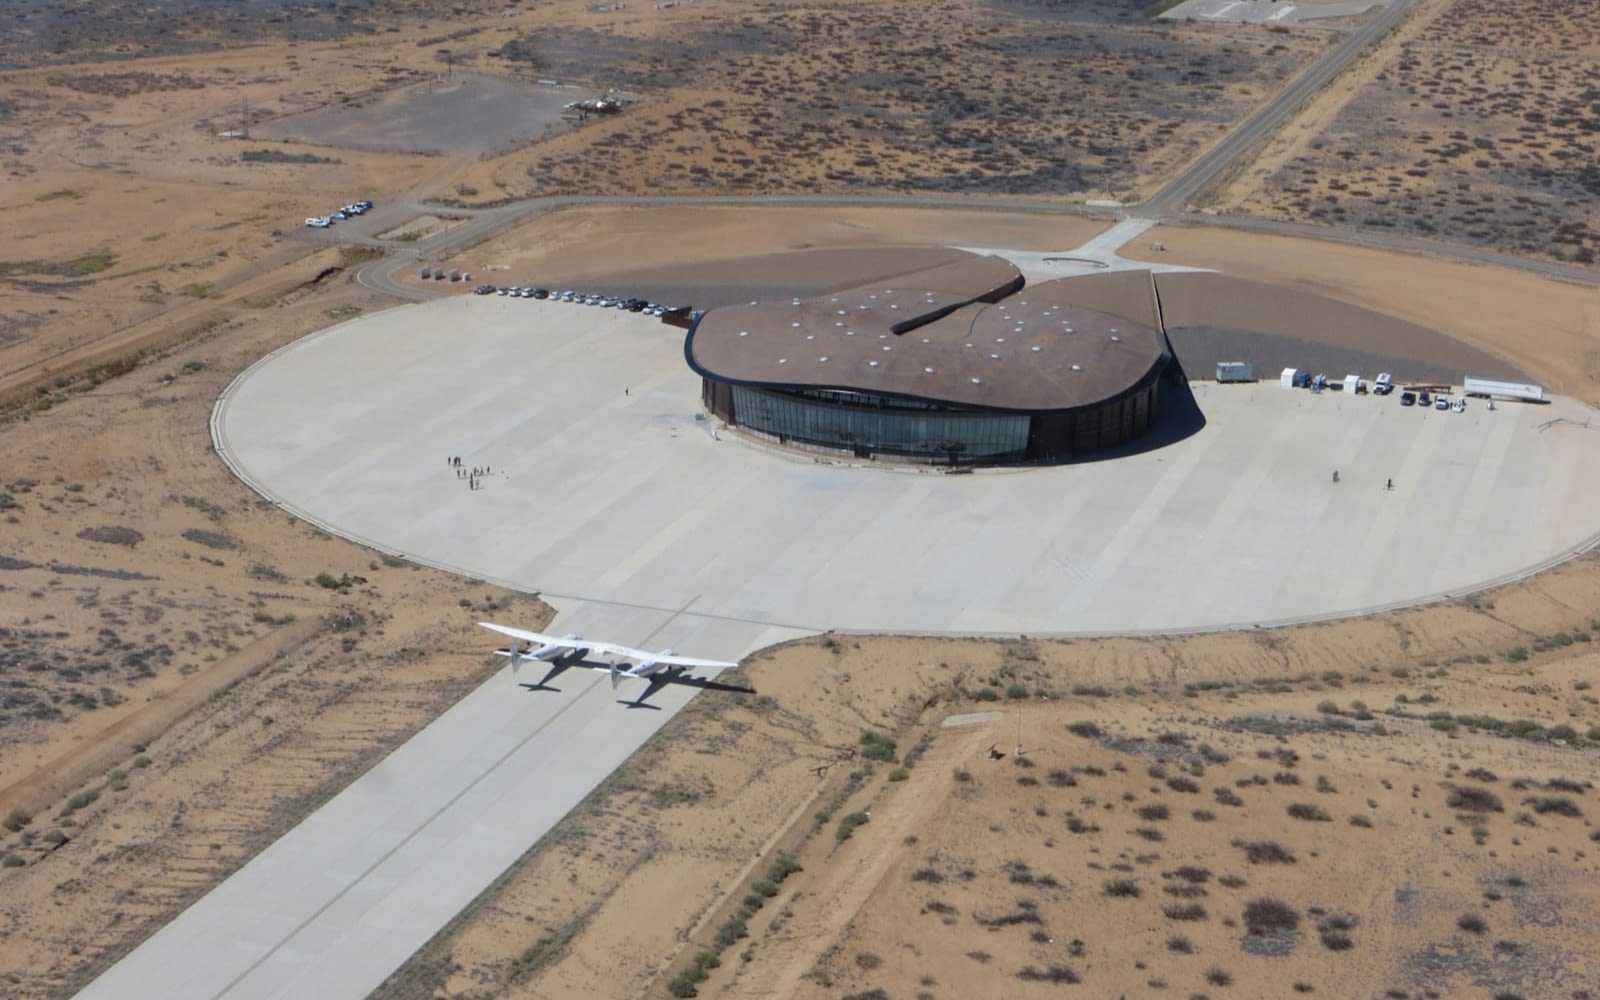 VMS Eve approaches Spaceport America